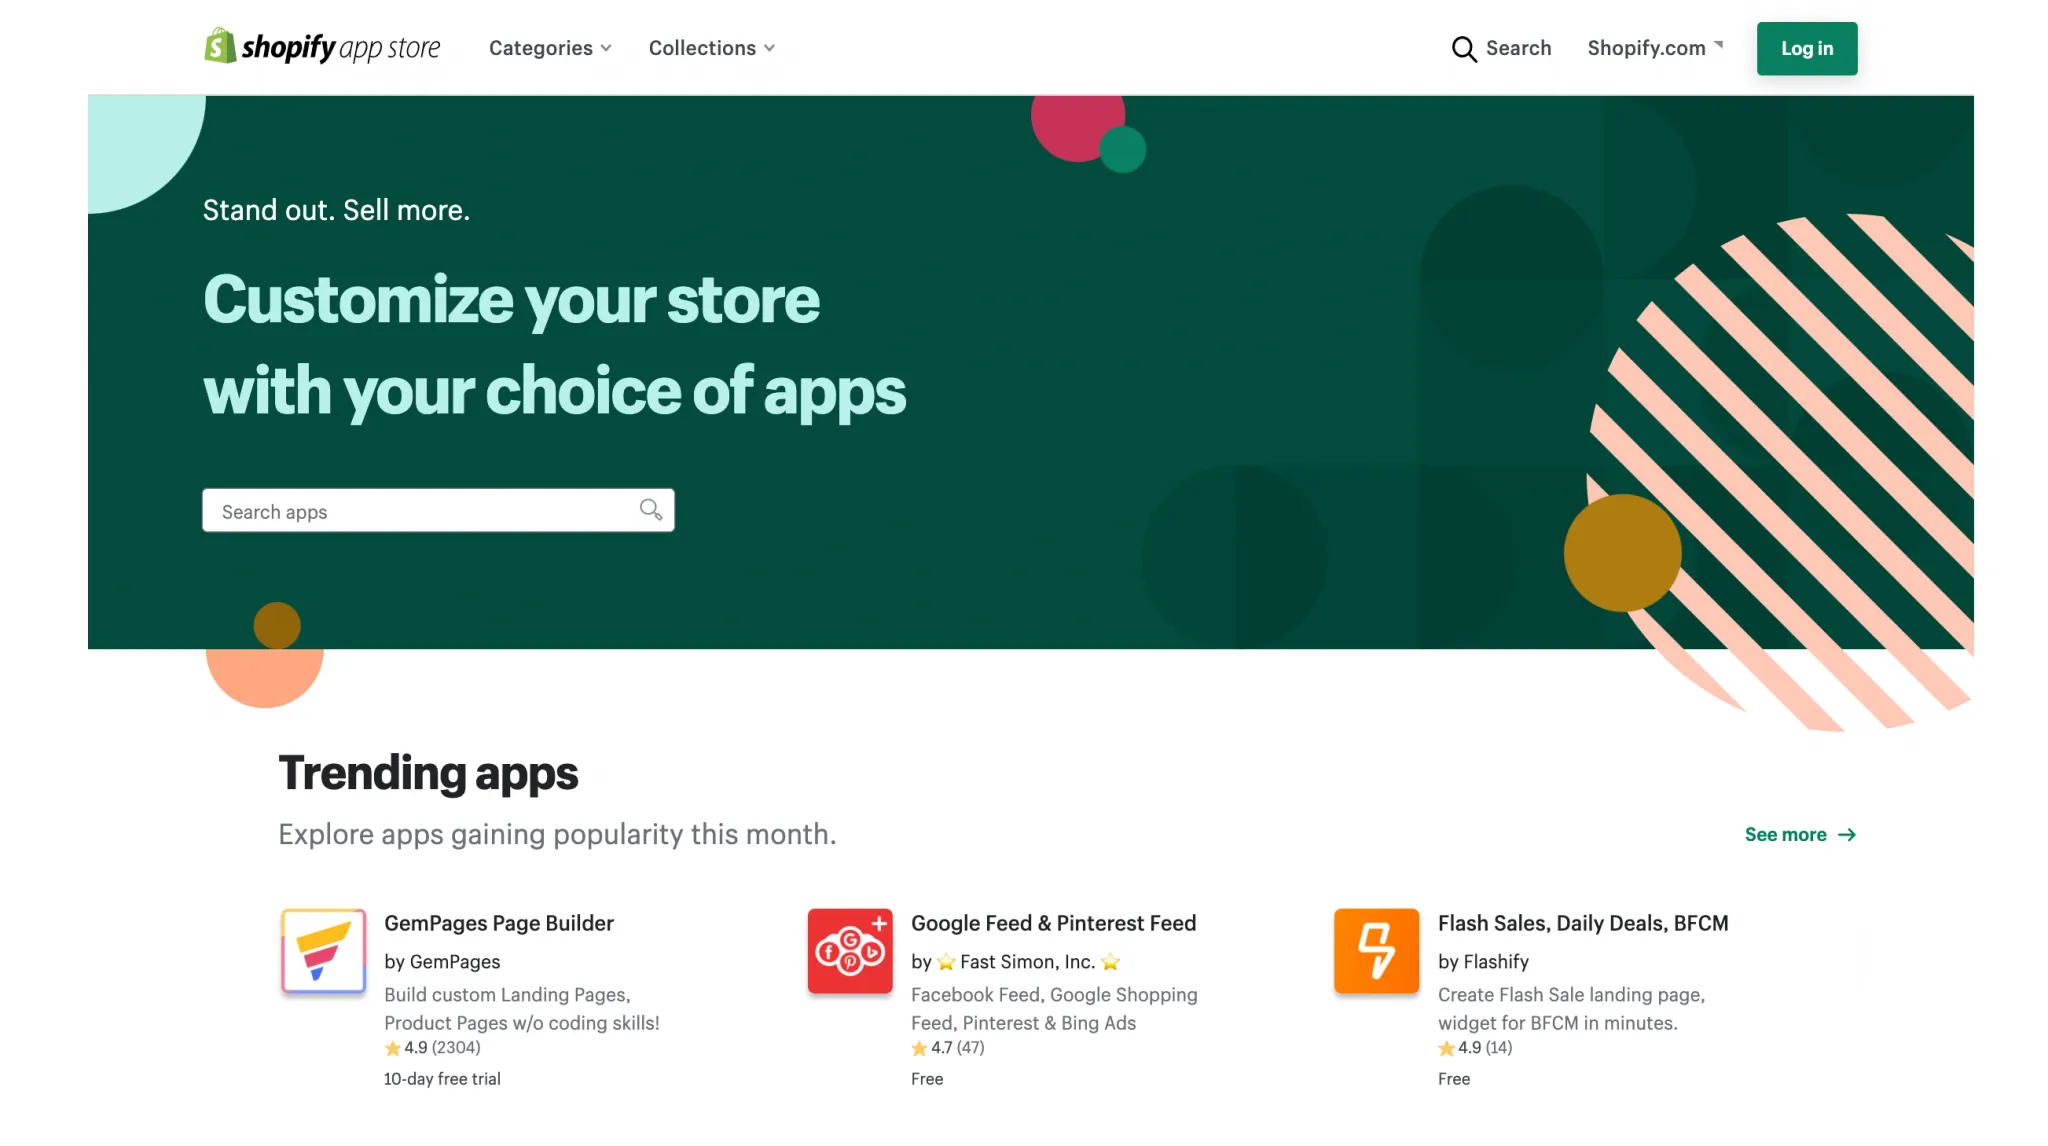 shopify-app-store